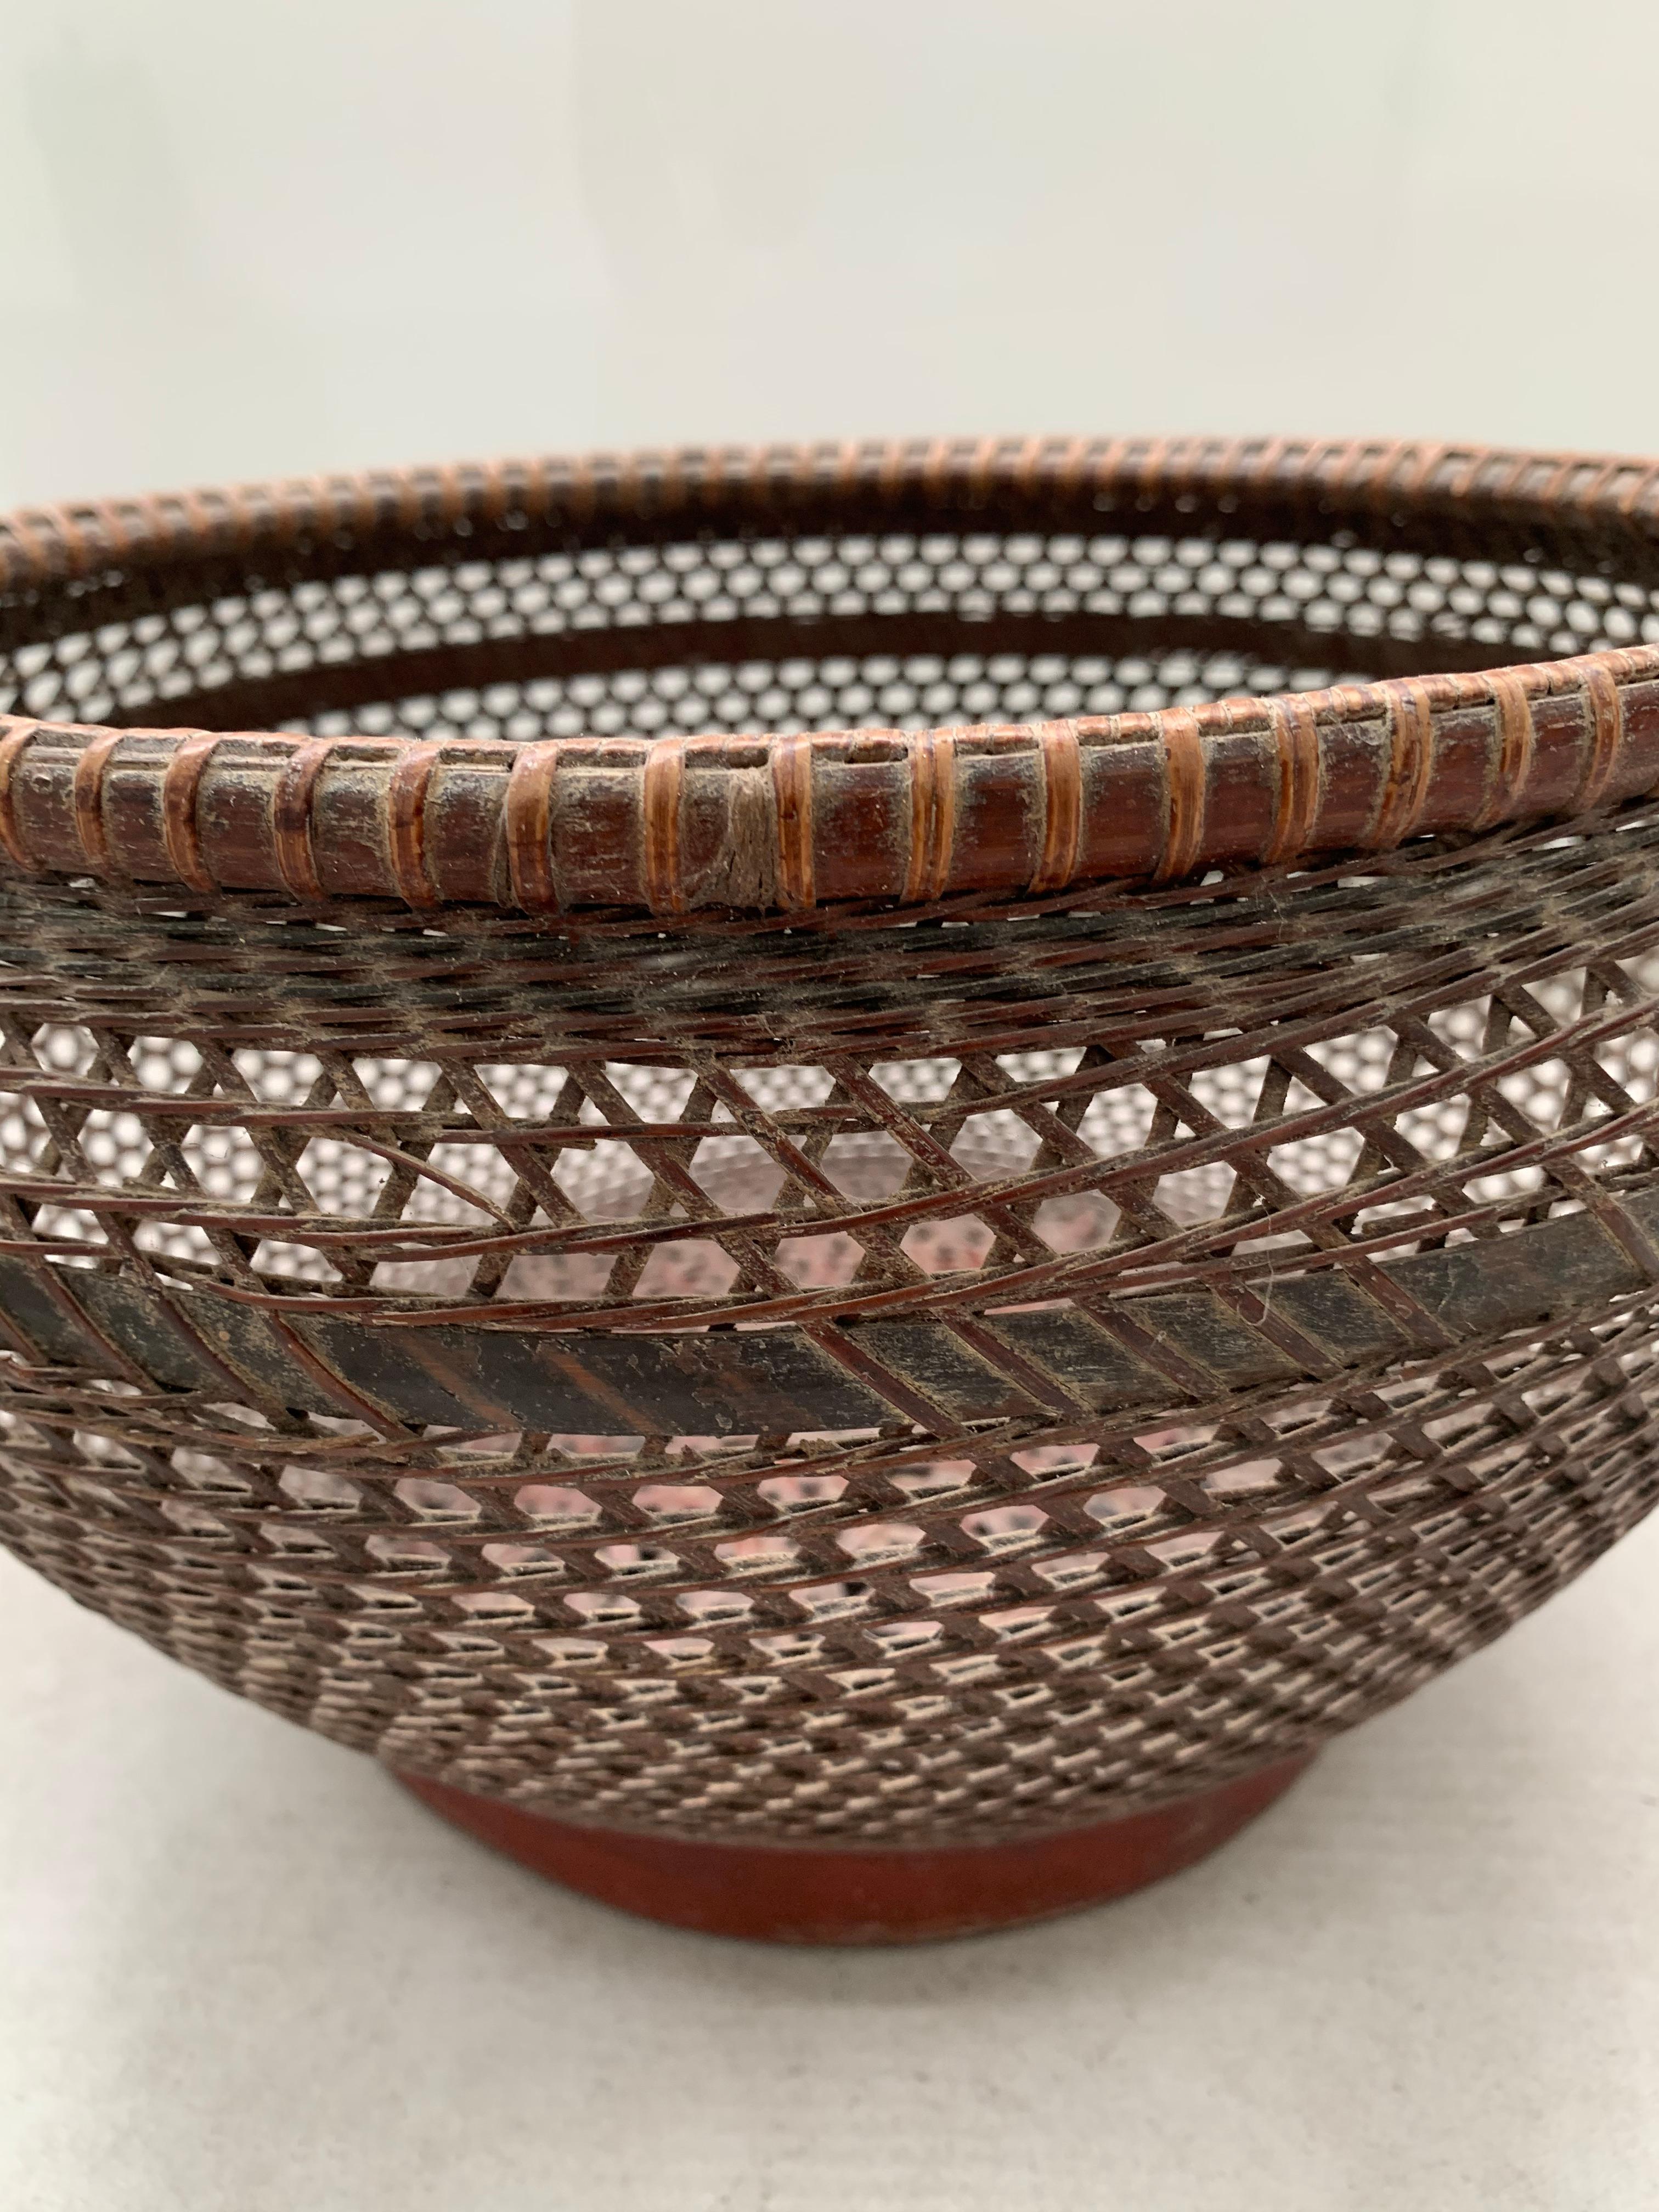 Chinese Basket Pair Hand-Woven Rattan with Red Wood Base, Early 20th Century For Sale 3